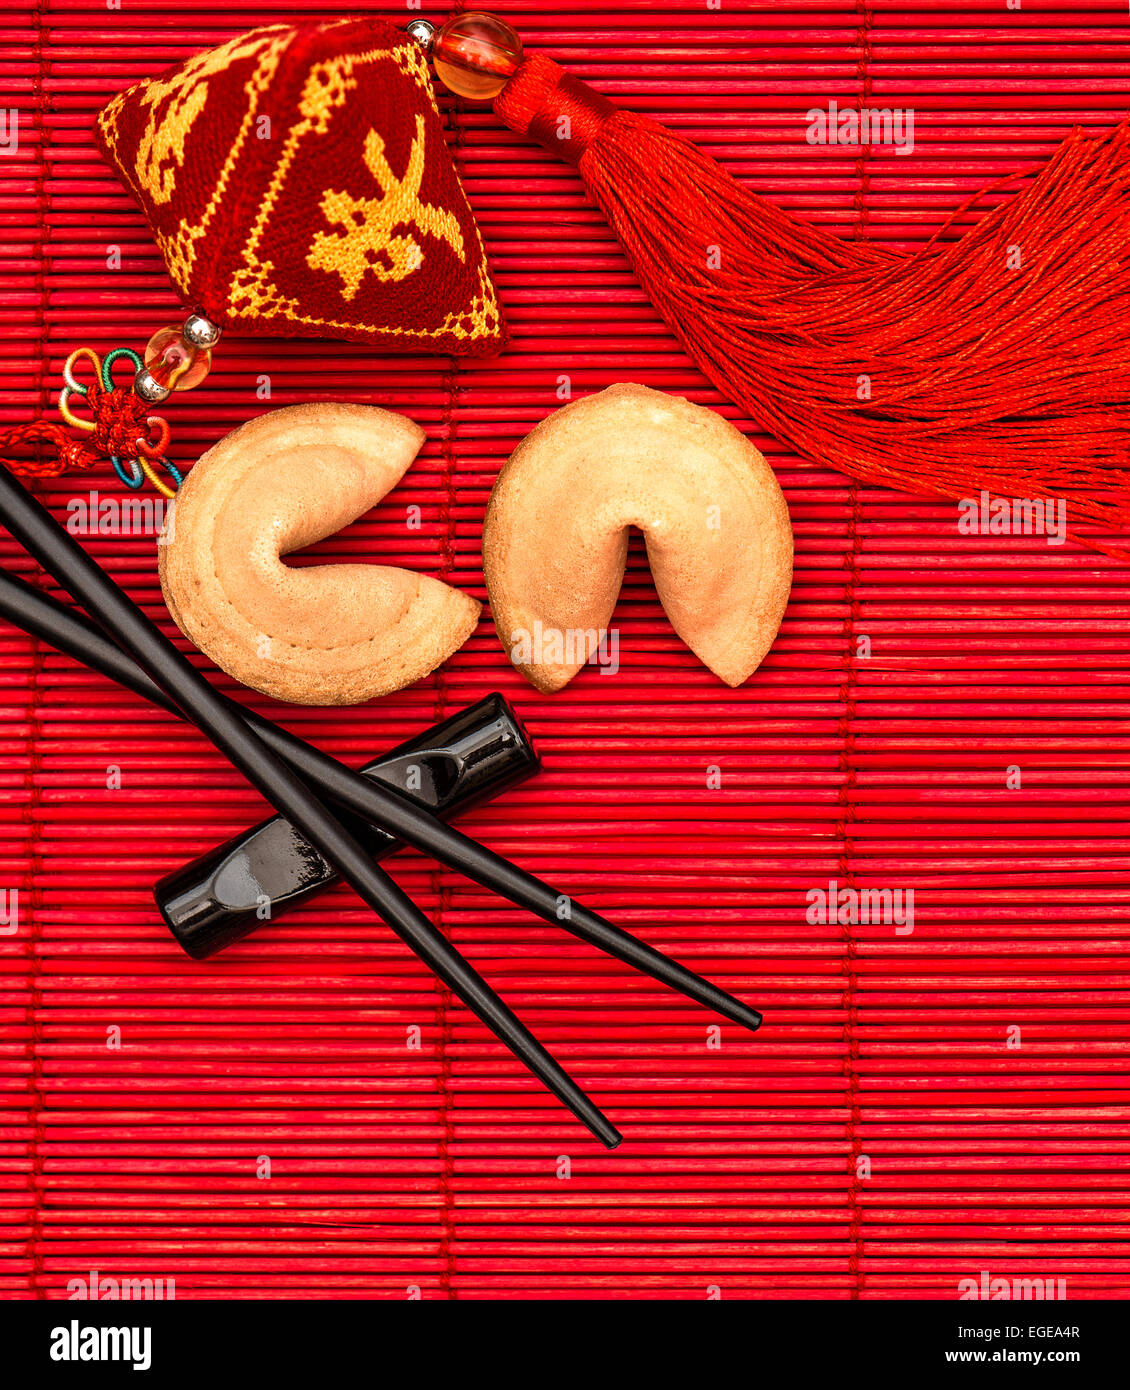 Lucky charm, fortune cookies and chopsticks. Chinese new year red background Stock Photo